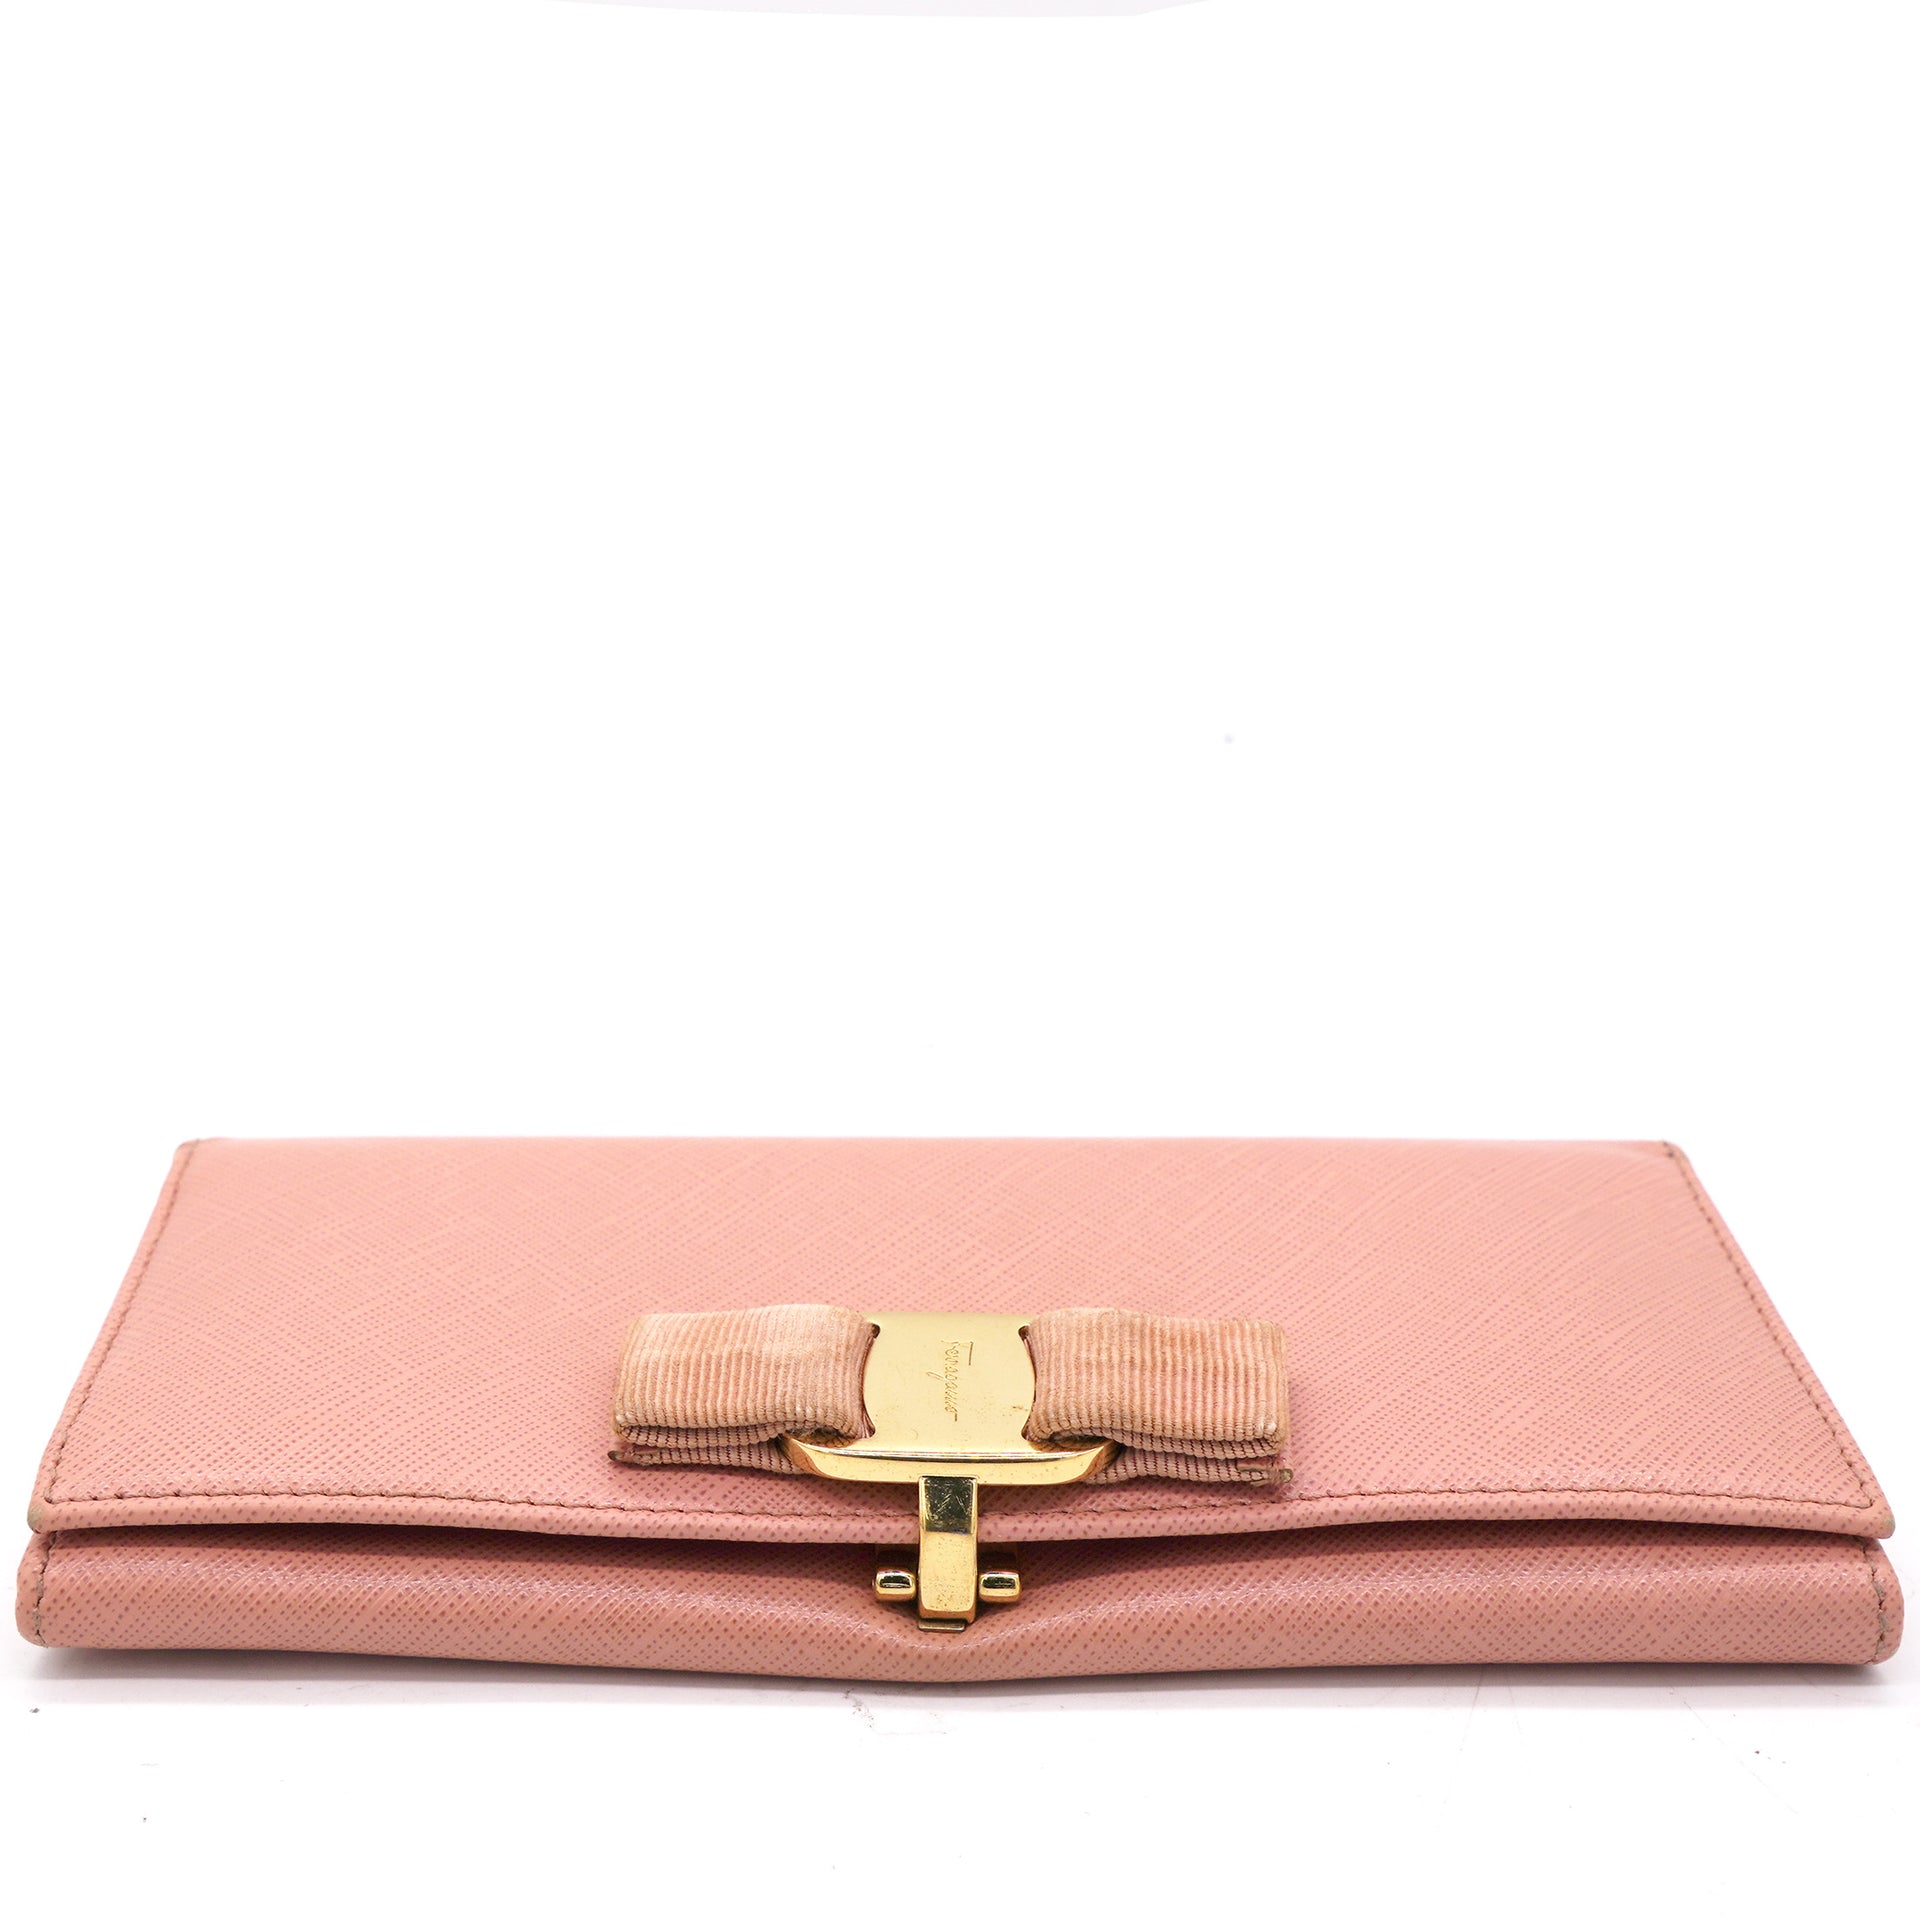 Pink Leather Vara Bow Wallet